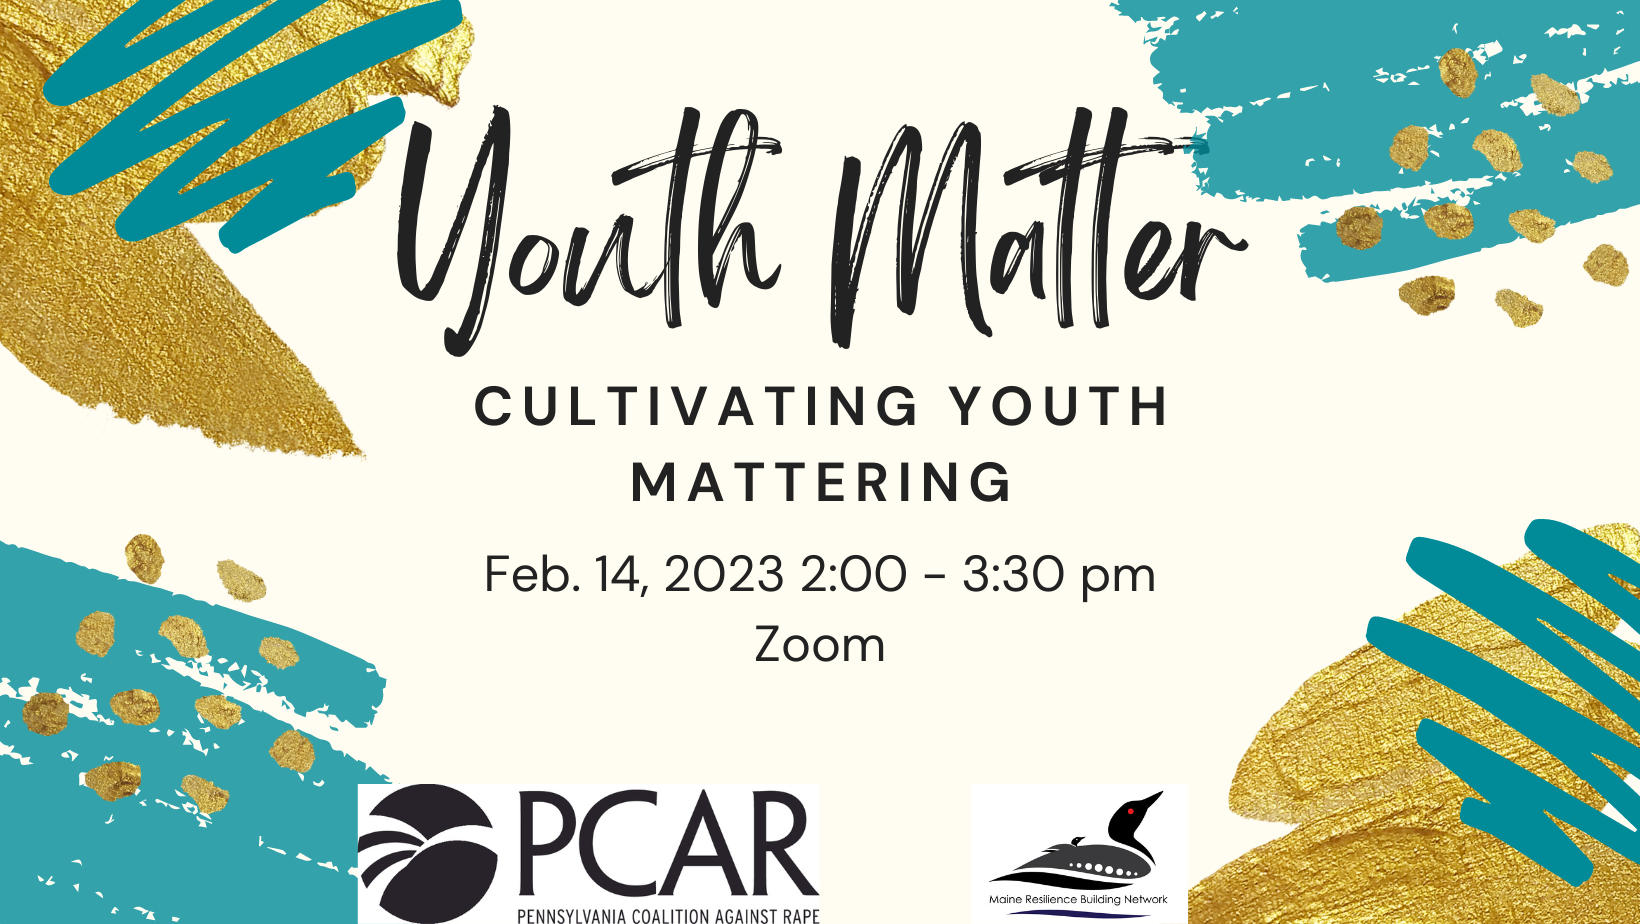 Youth Matter Cultivating Youth